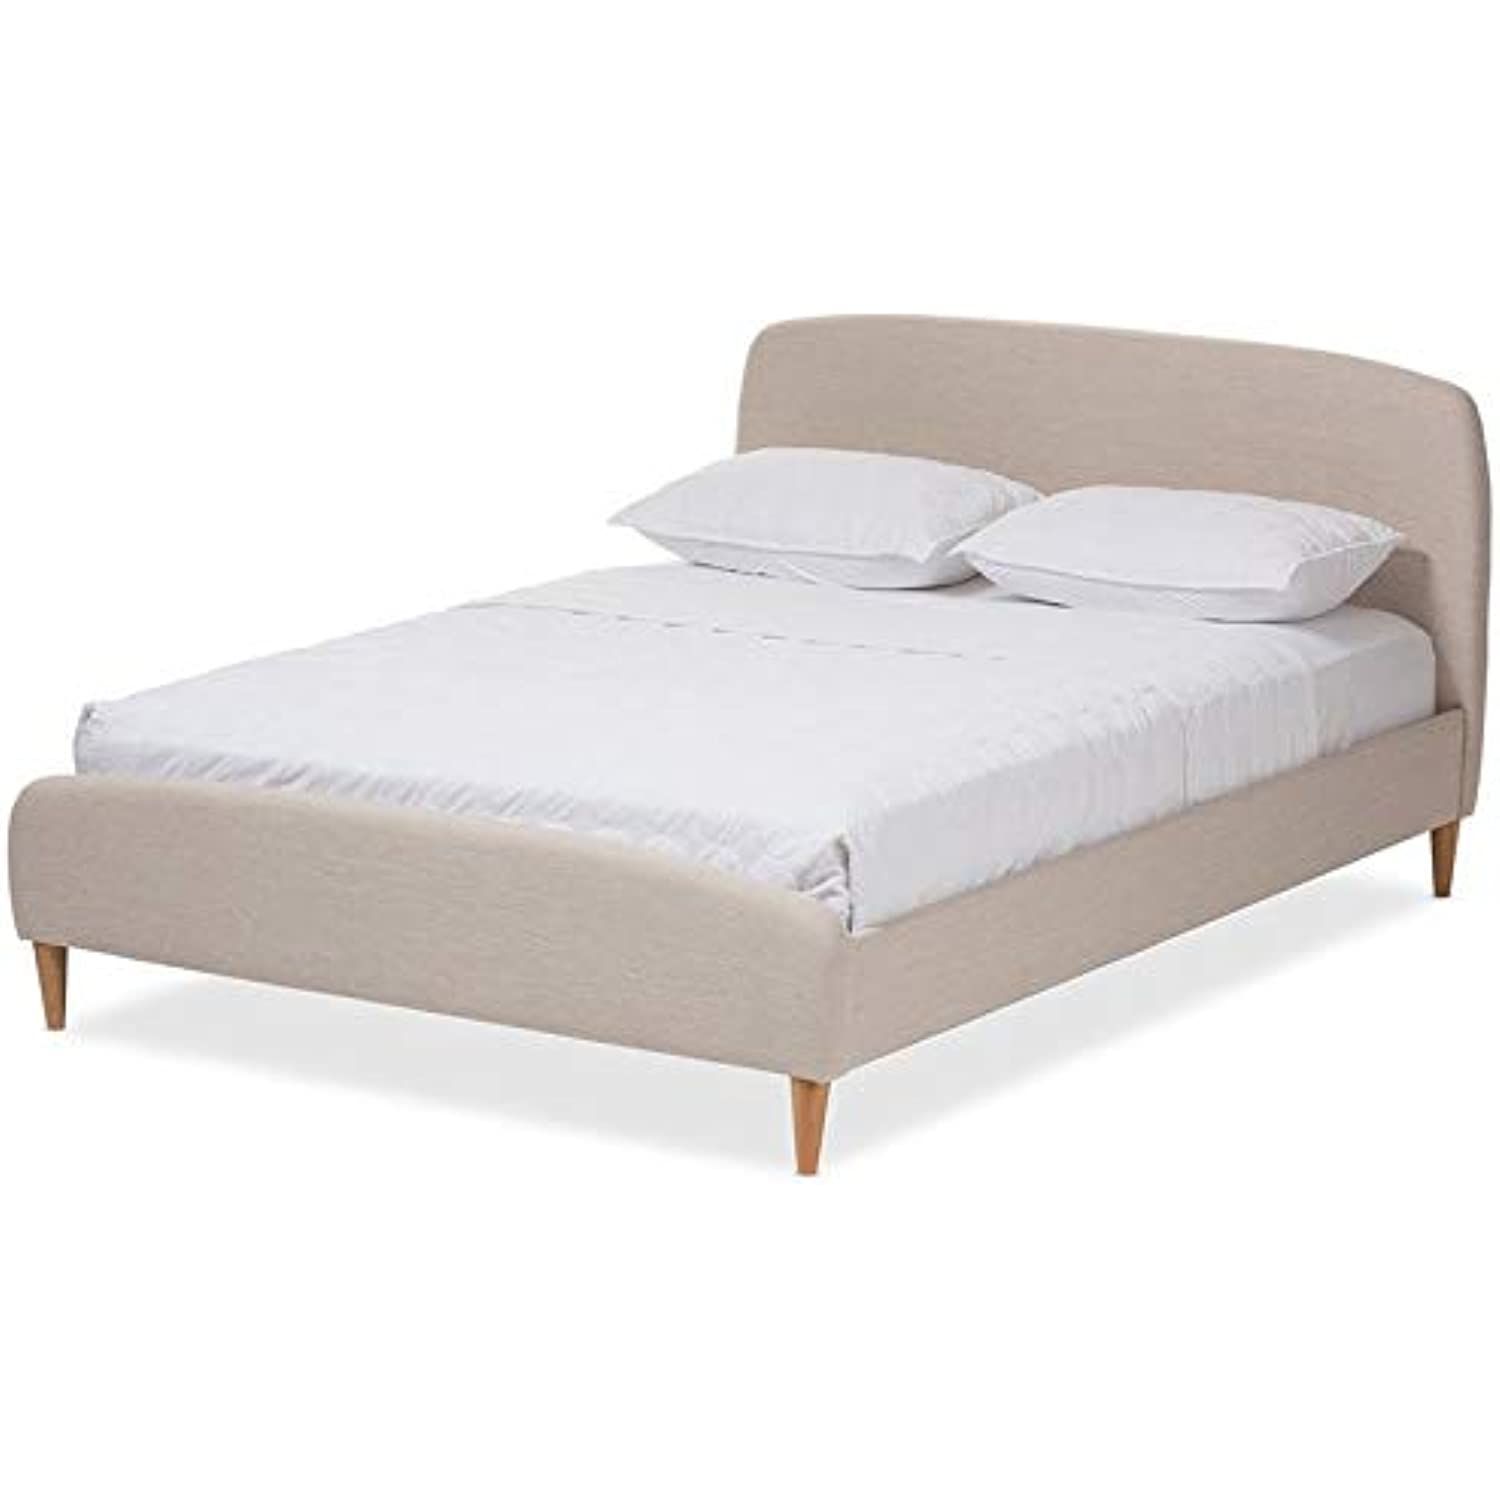 BOWERY HILL Mid-Century Upholstered Queen Platform Bed in Light Beige | Amazon (US)